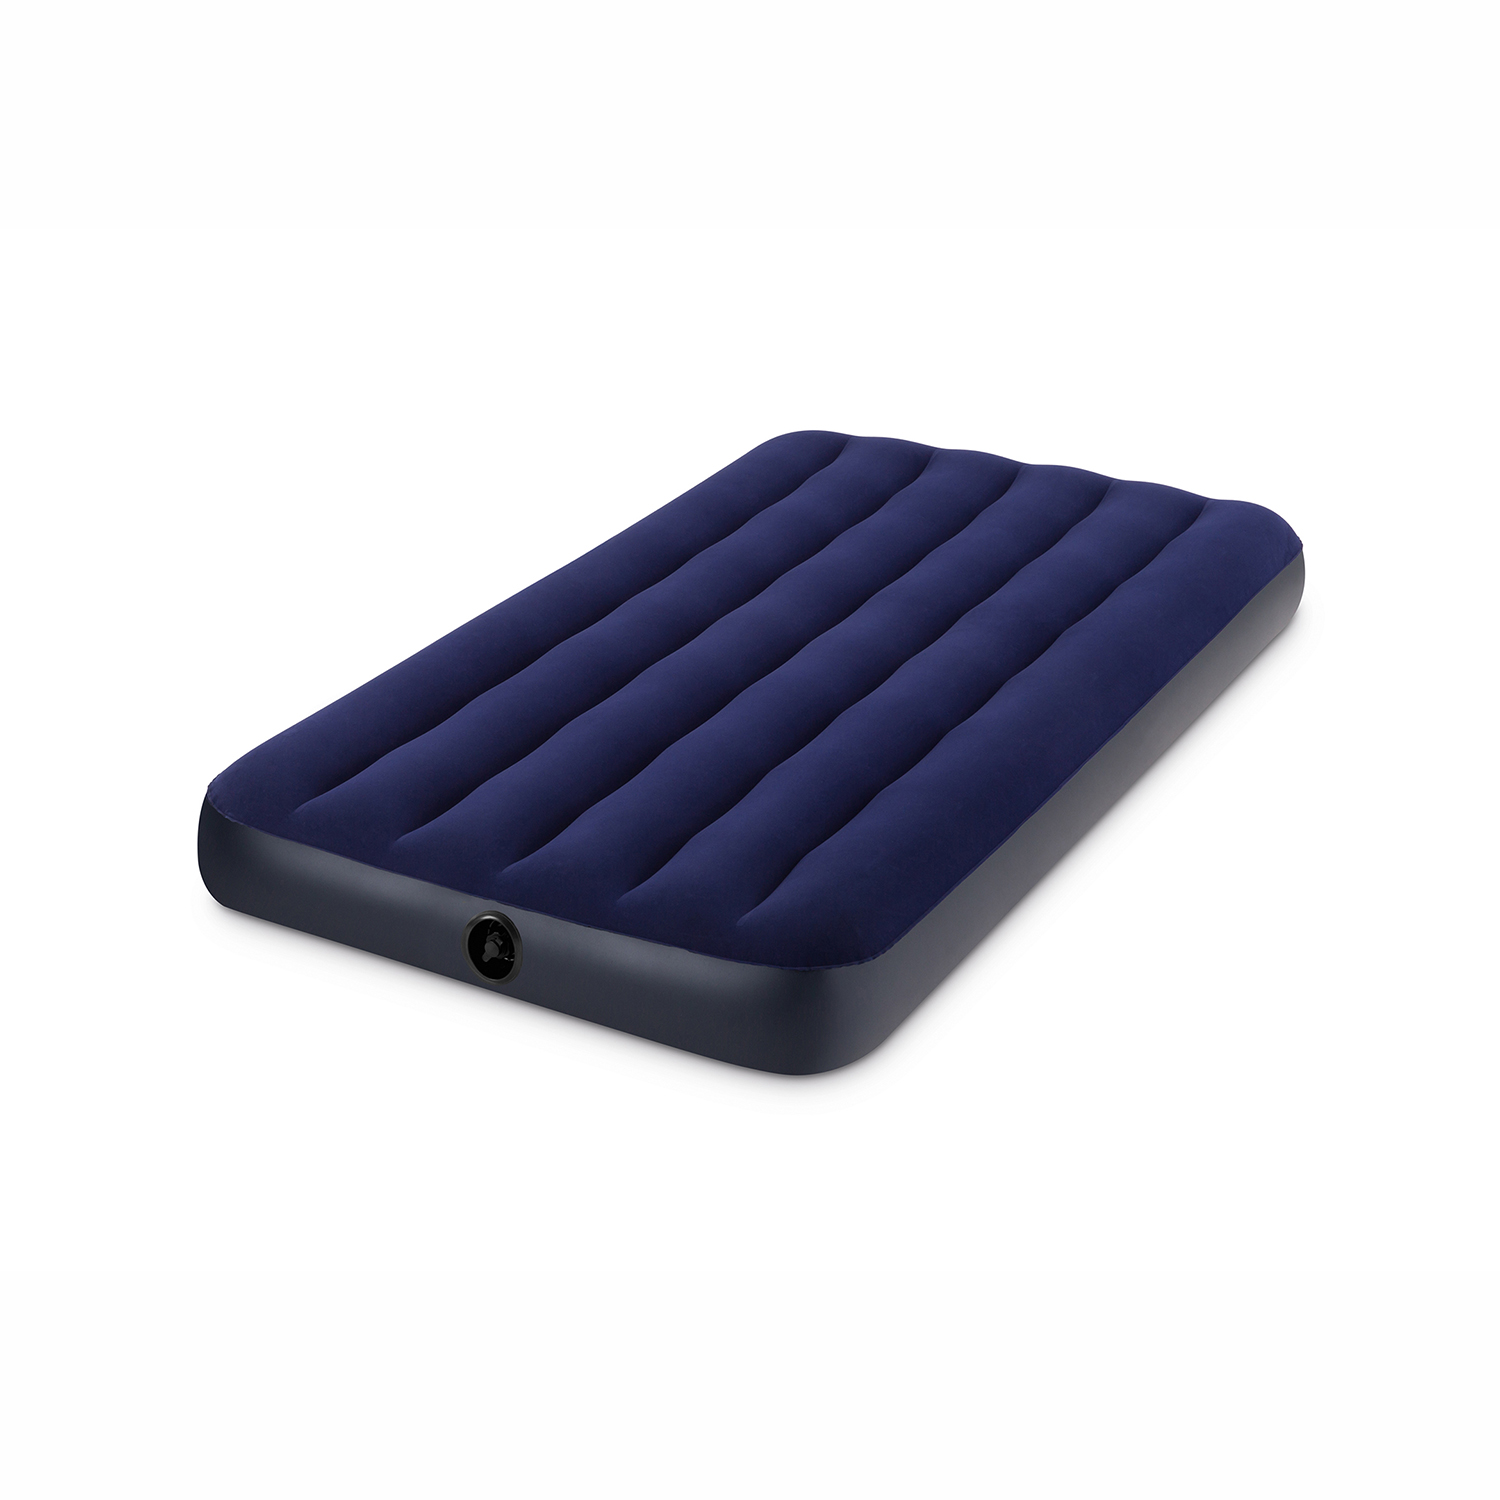 Intex 8.75" Classic Downy Inflatable Airbed Mattress, Twin - image 1 of 6